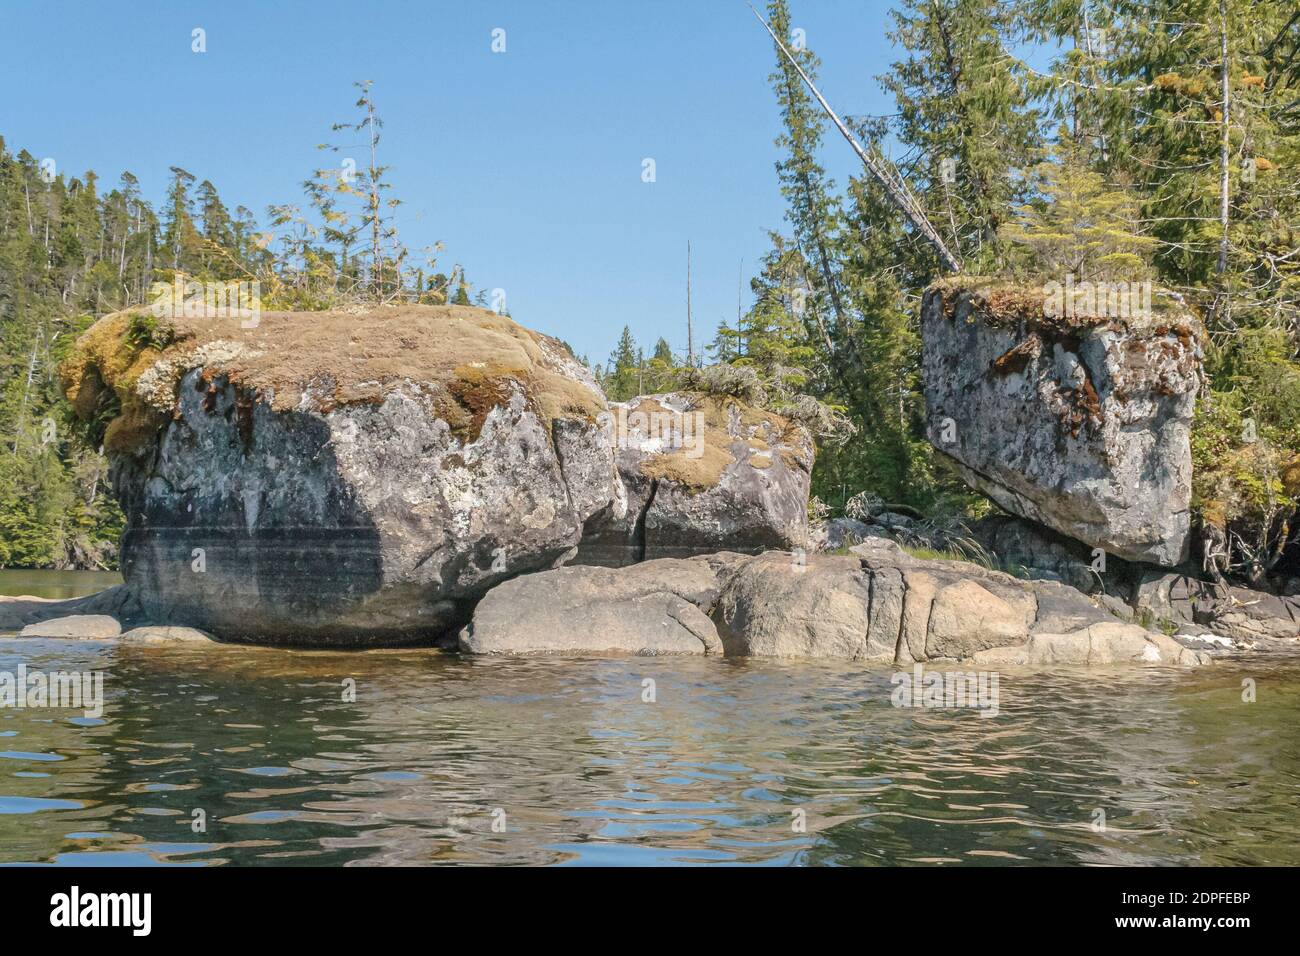 Three huge, moss-topped, textured granite boulders stand close together on a rocky shoreline in a remote wilderness area of coastal British Columbia. Stock Photo